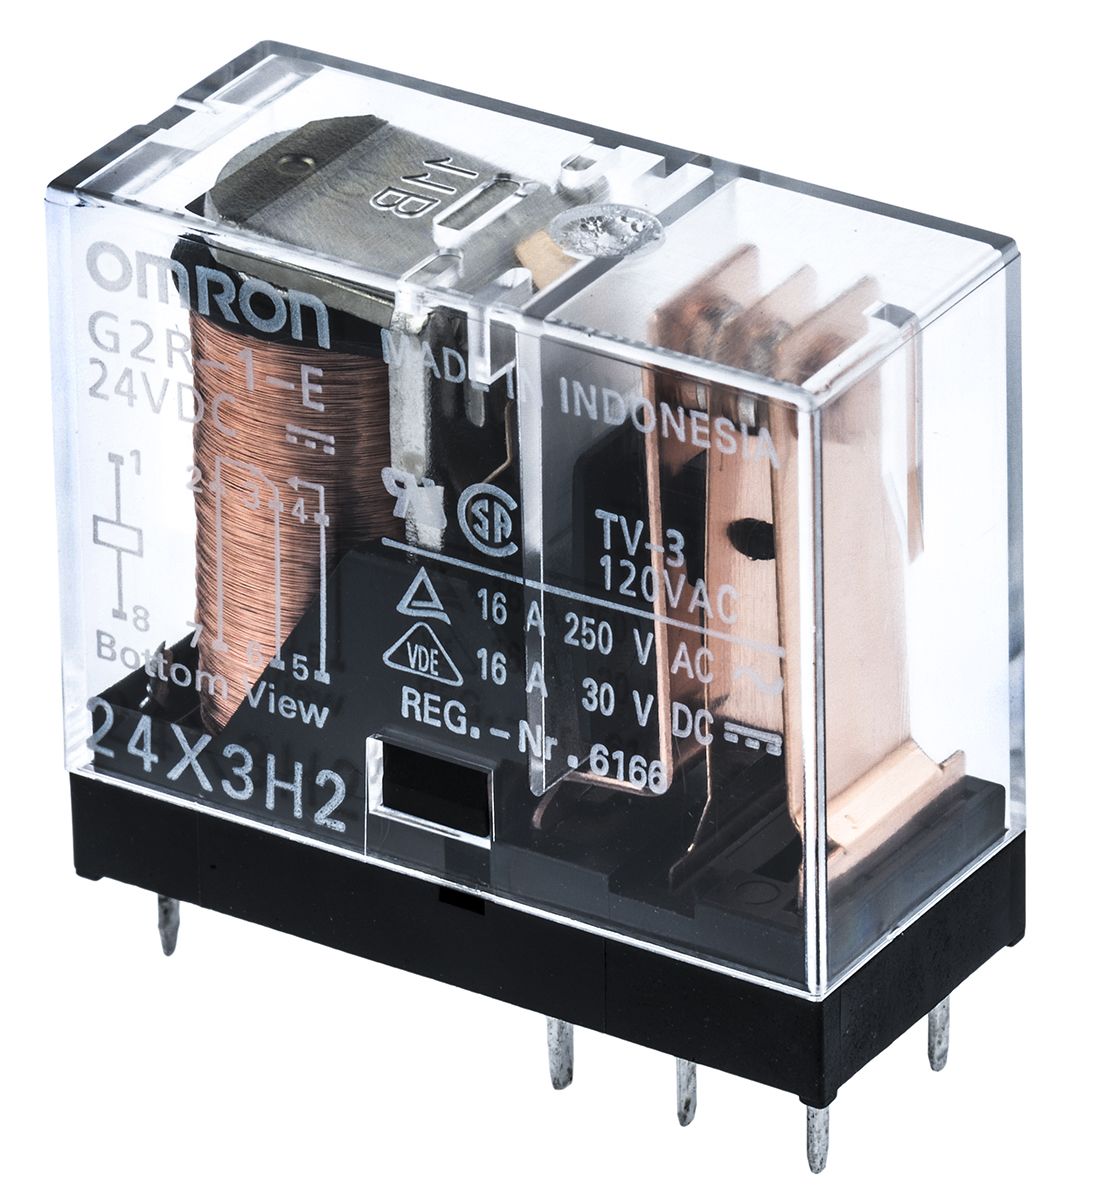 Omron PCB Mount Power Relay, 24V dc Coil, 16A Switching Current, SPDT